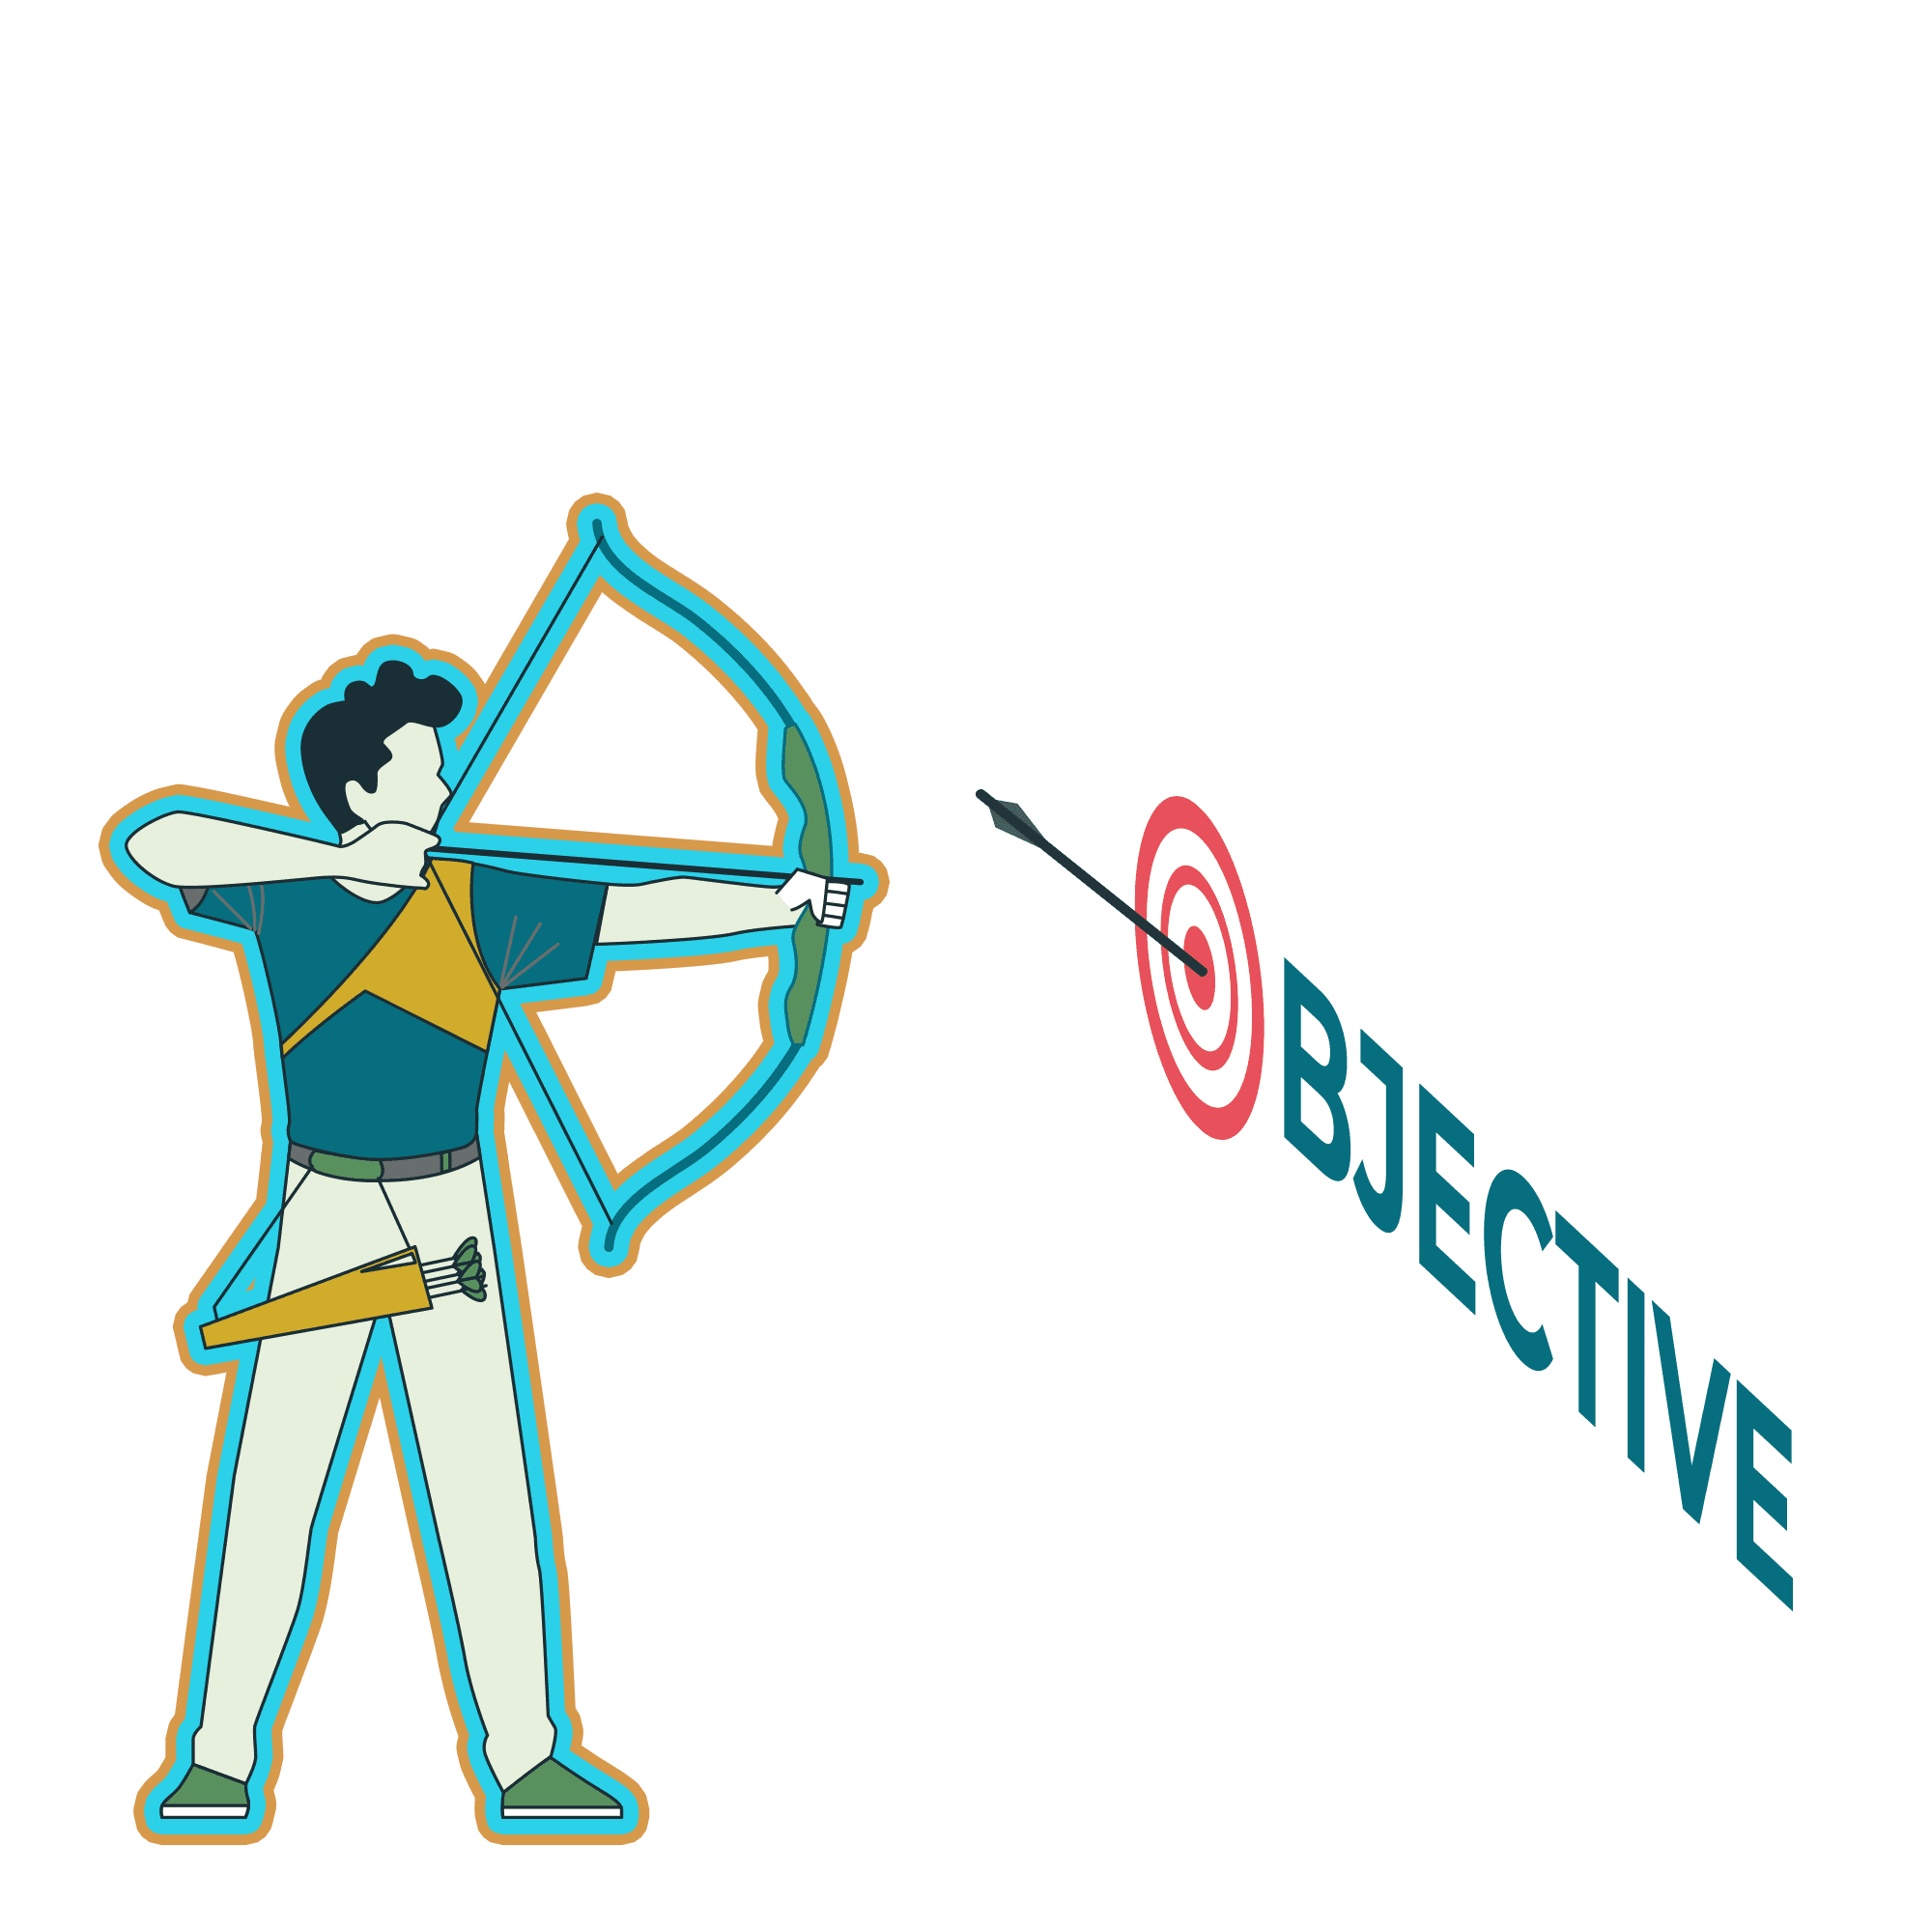 Resume Objective Examples - Writing Tips ( + 85 Sample )